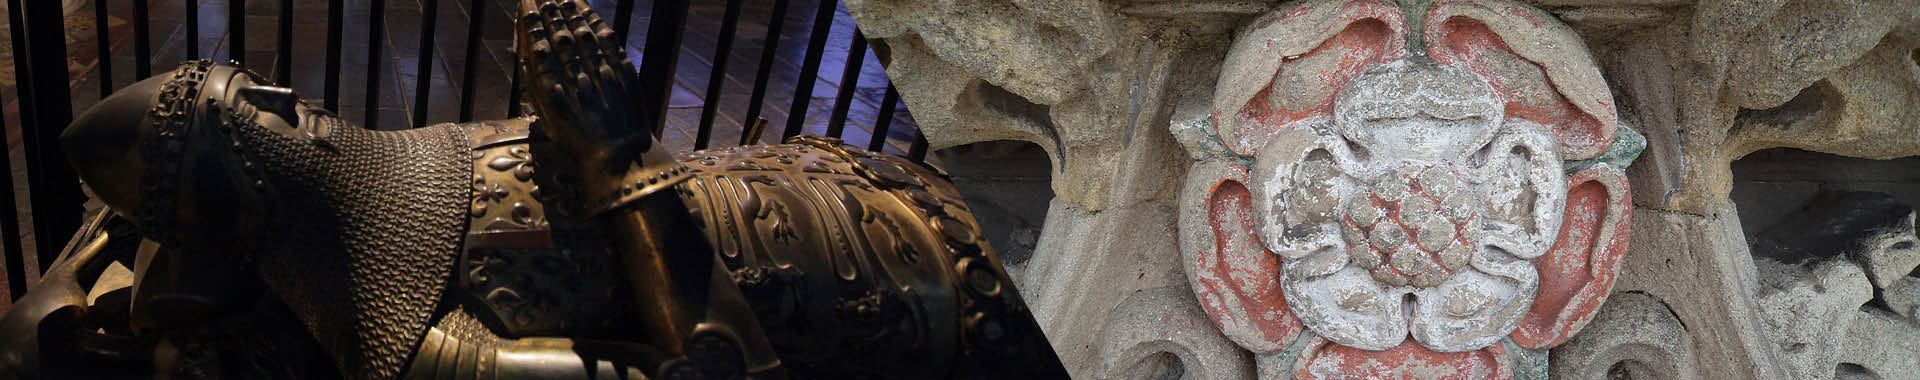 Split image of the Black Prince and a close up of ancient stone work